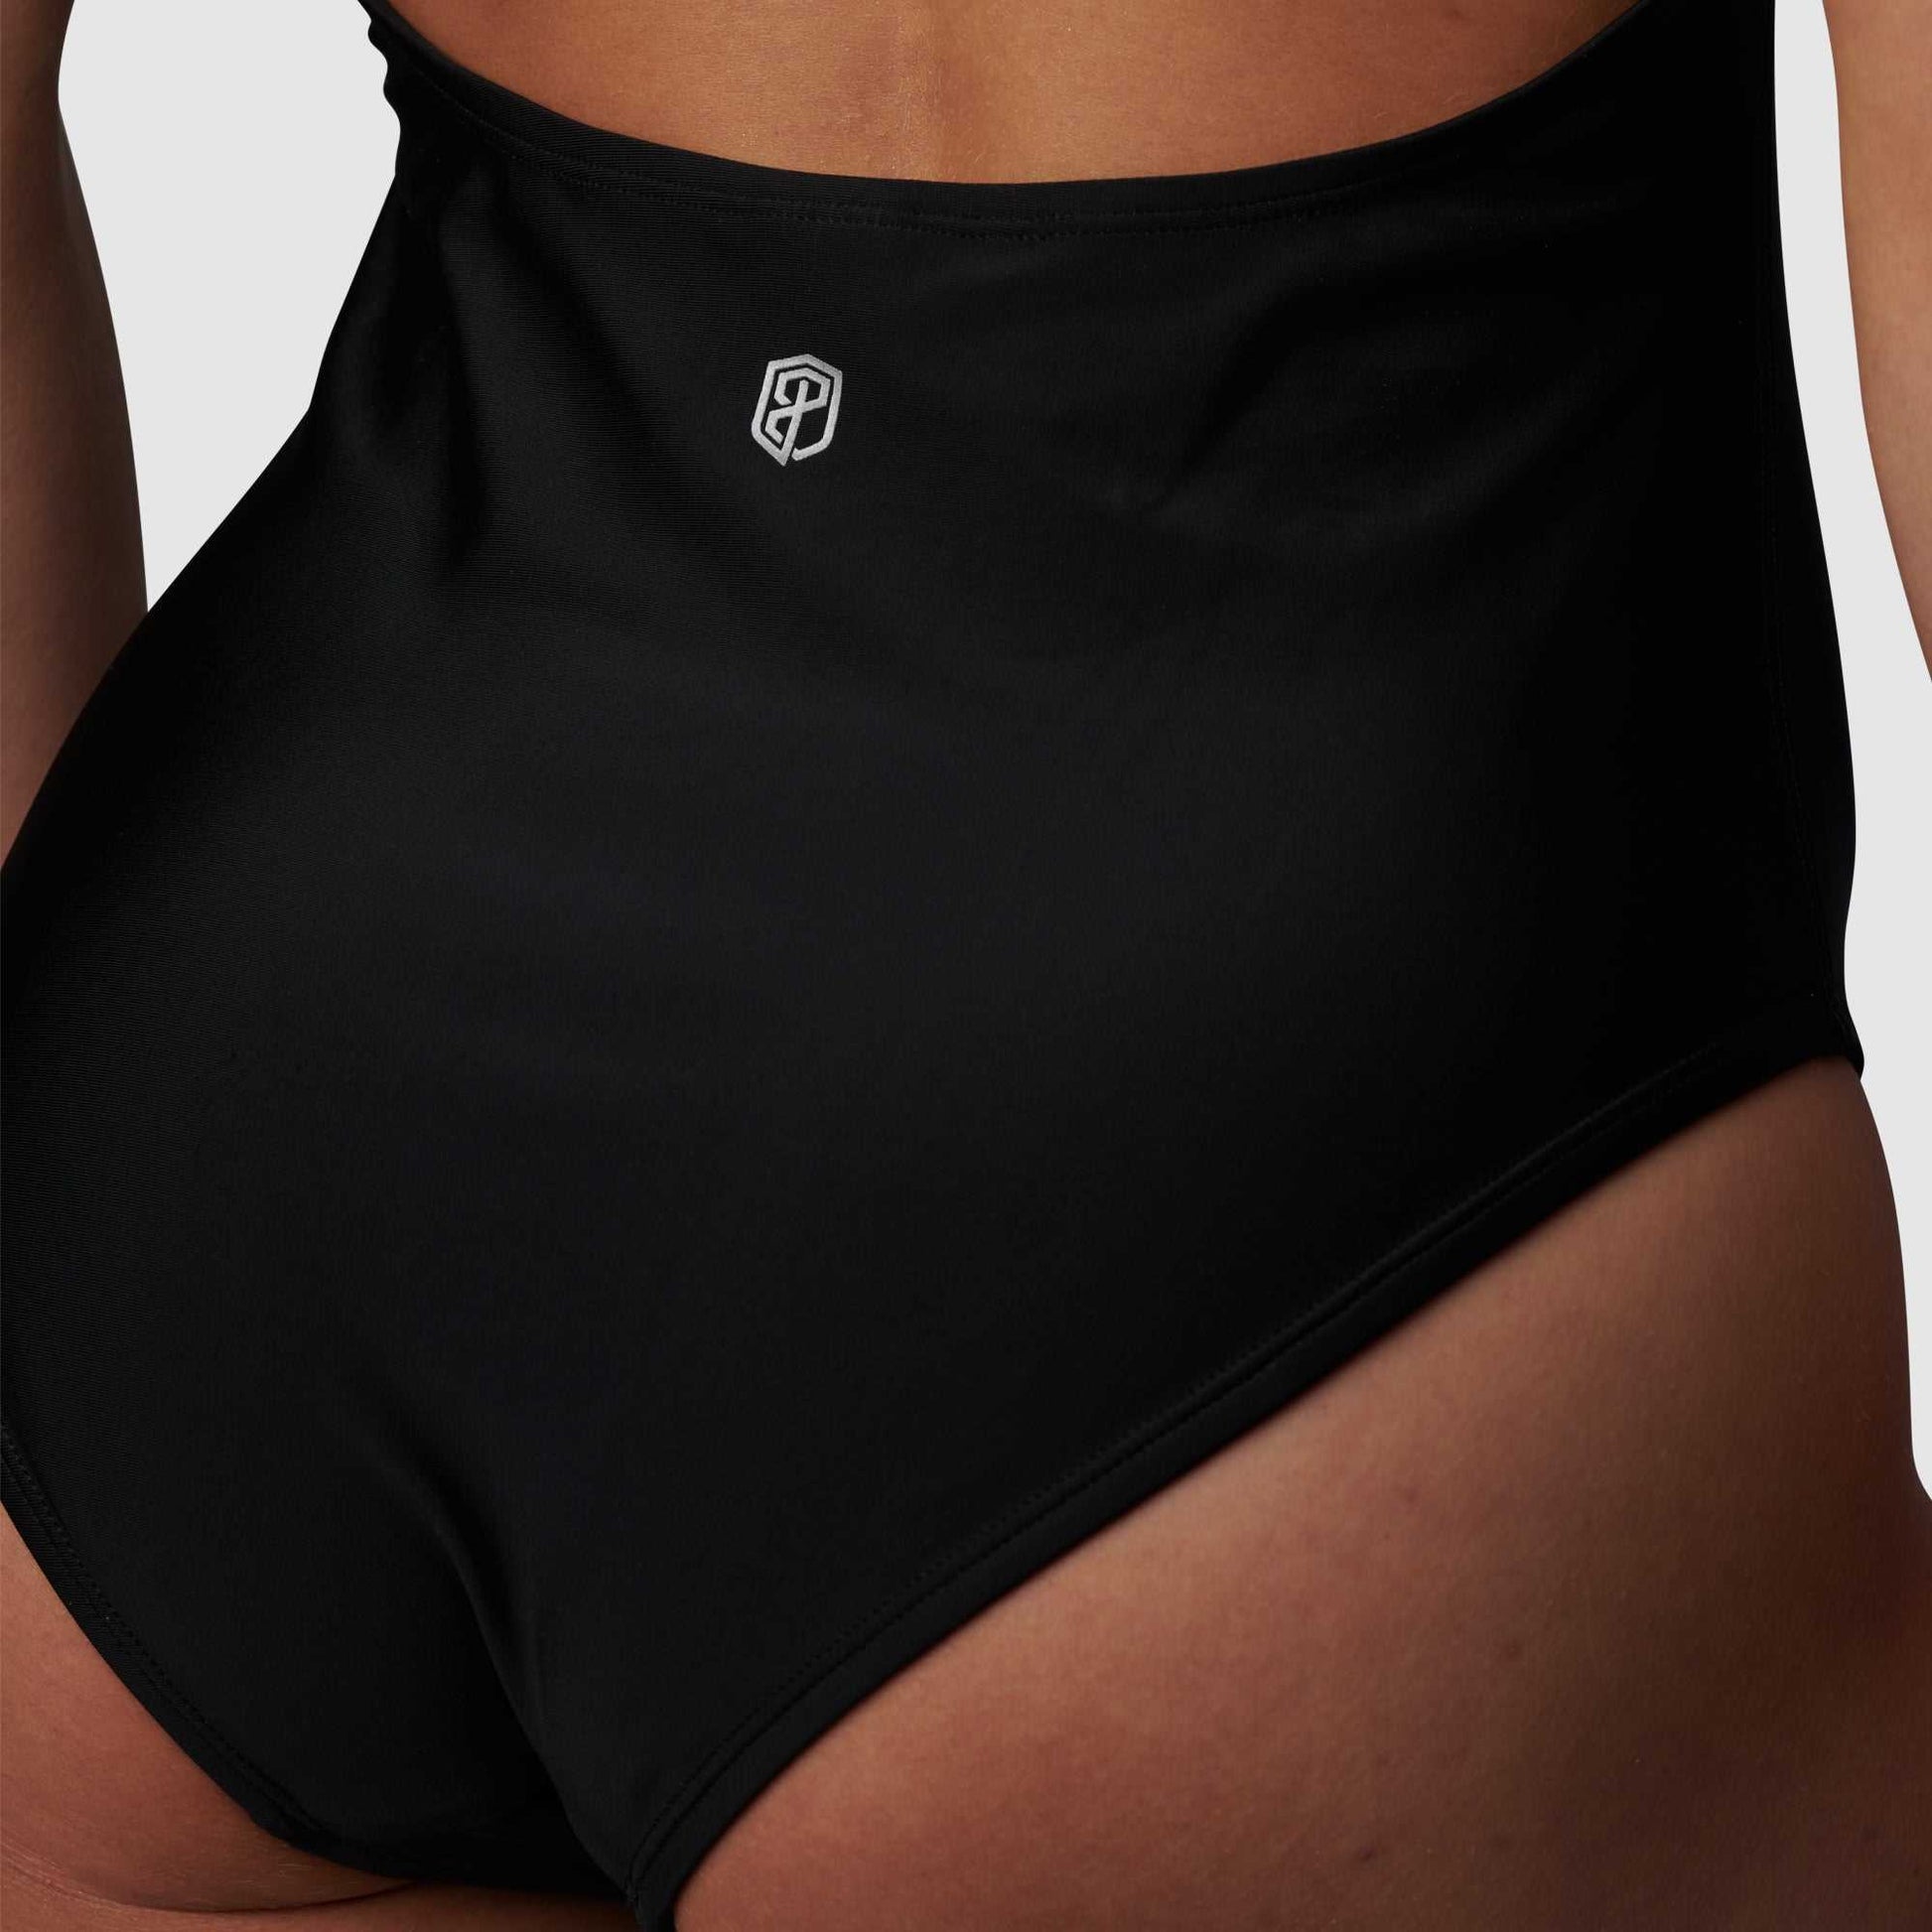 Freestyle One Piece Swimsuit (Black)